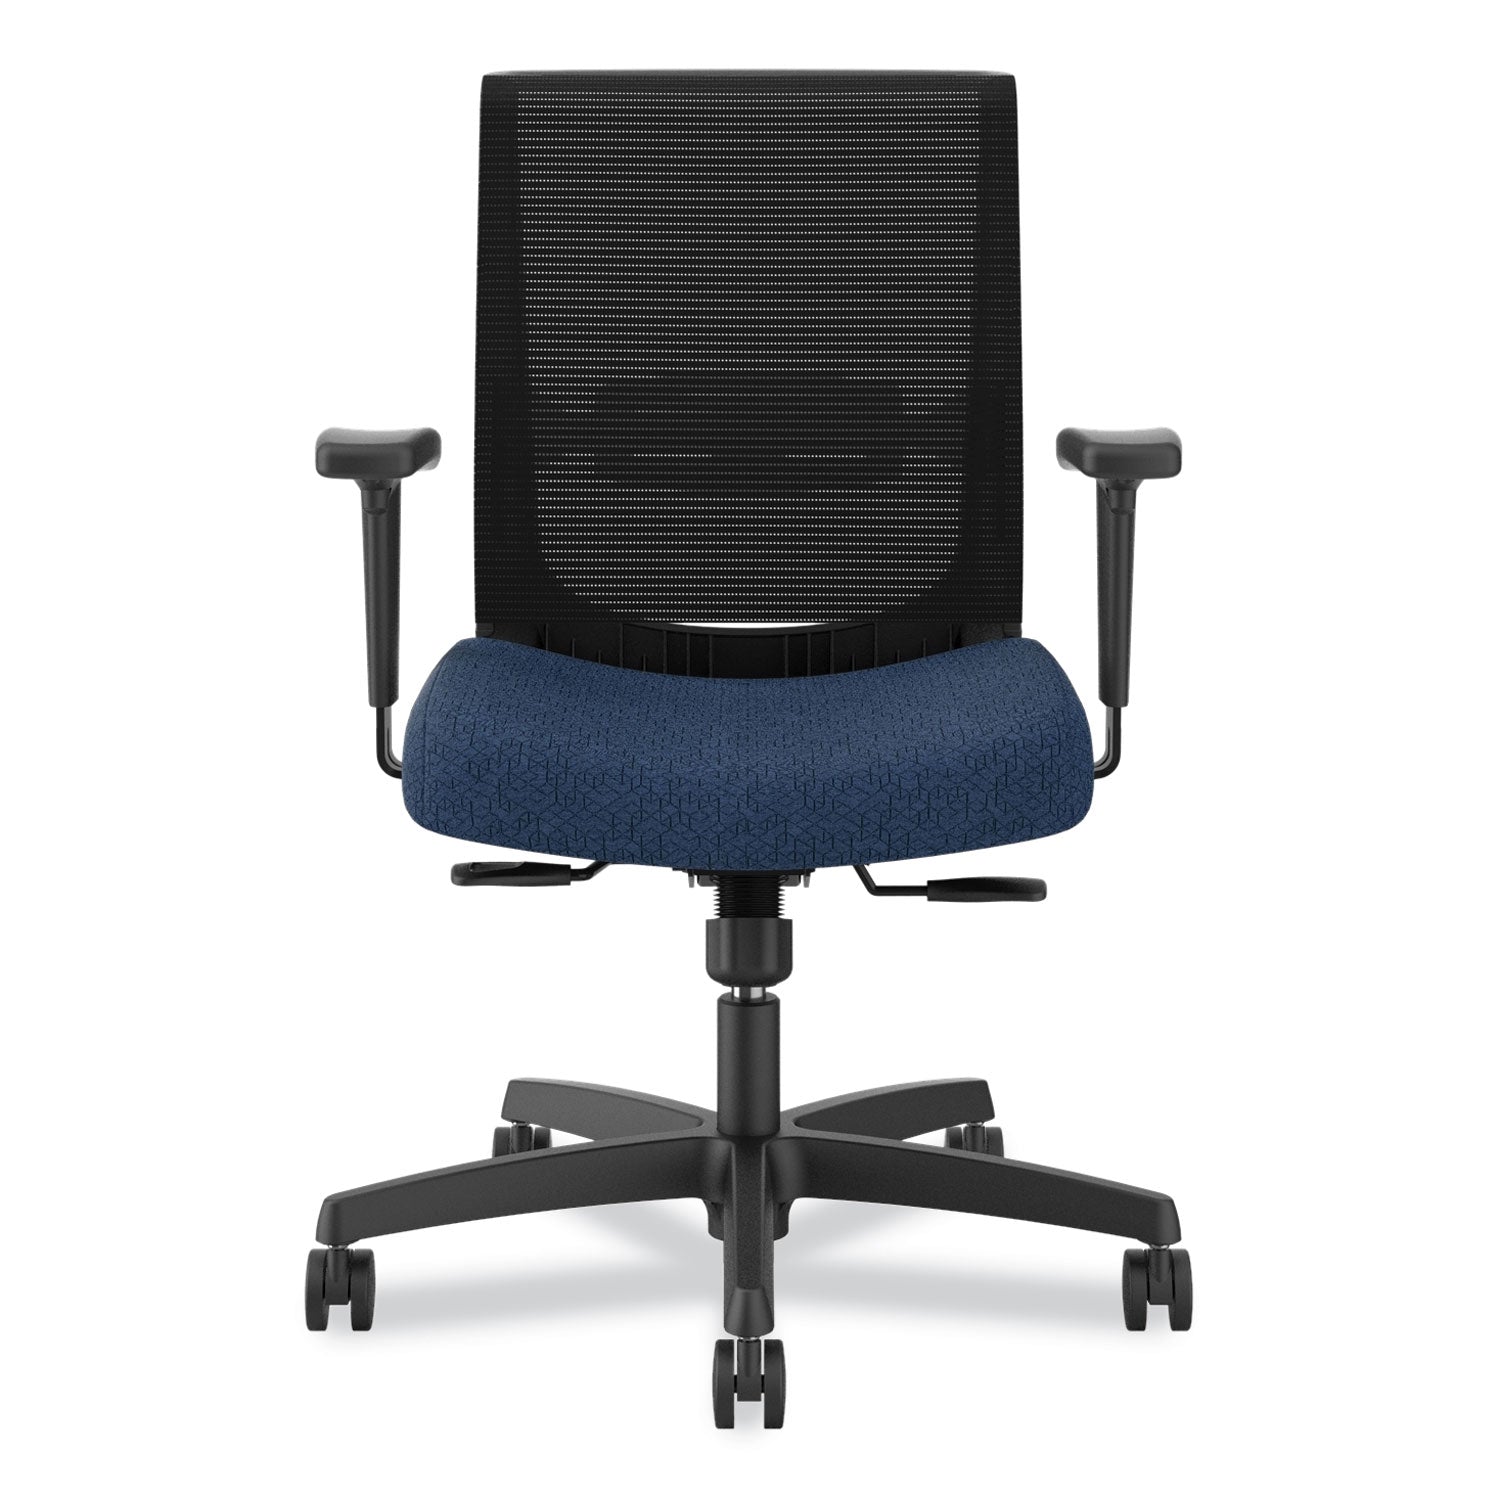 convergence-mid-back-task-chair-up-to-275lb-165-to-21-seat-ht-navy-seat-black-back-frame-ships-in-7-10-bus-days_honcmy1aapx13 - 2